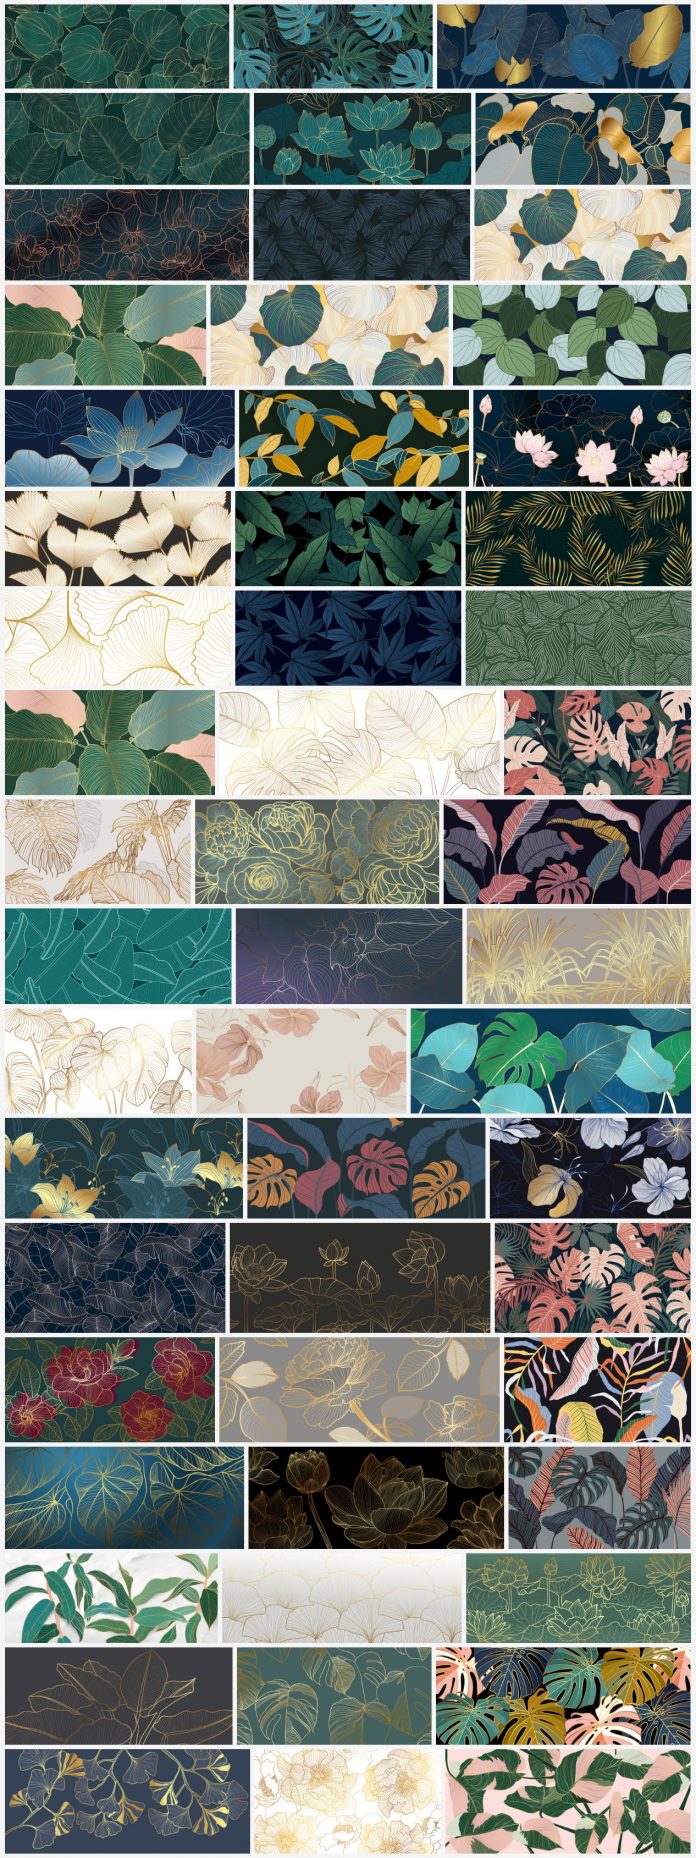 Floral vector backgrounds by Adobe Stock contributor @vectortwins.